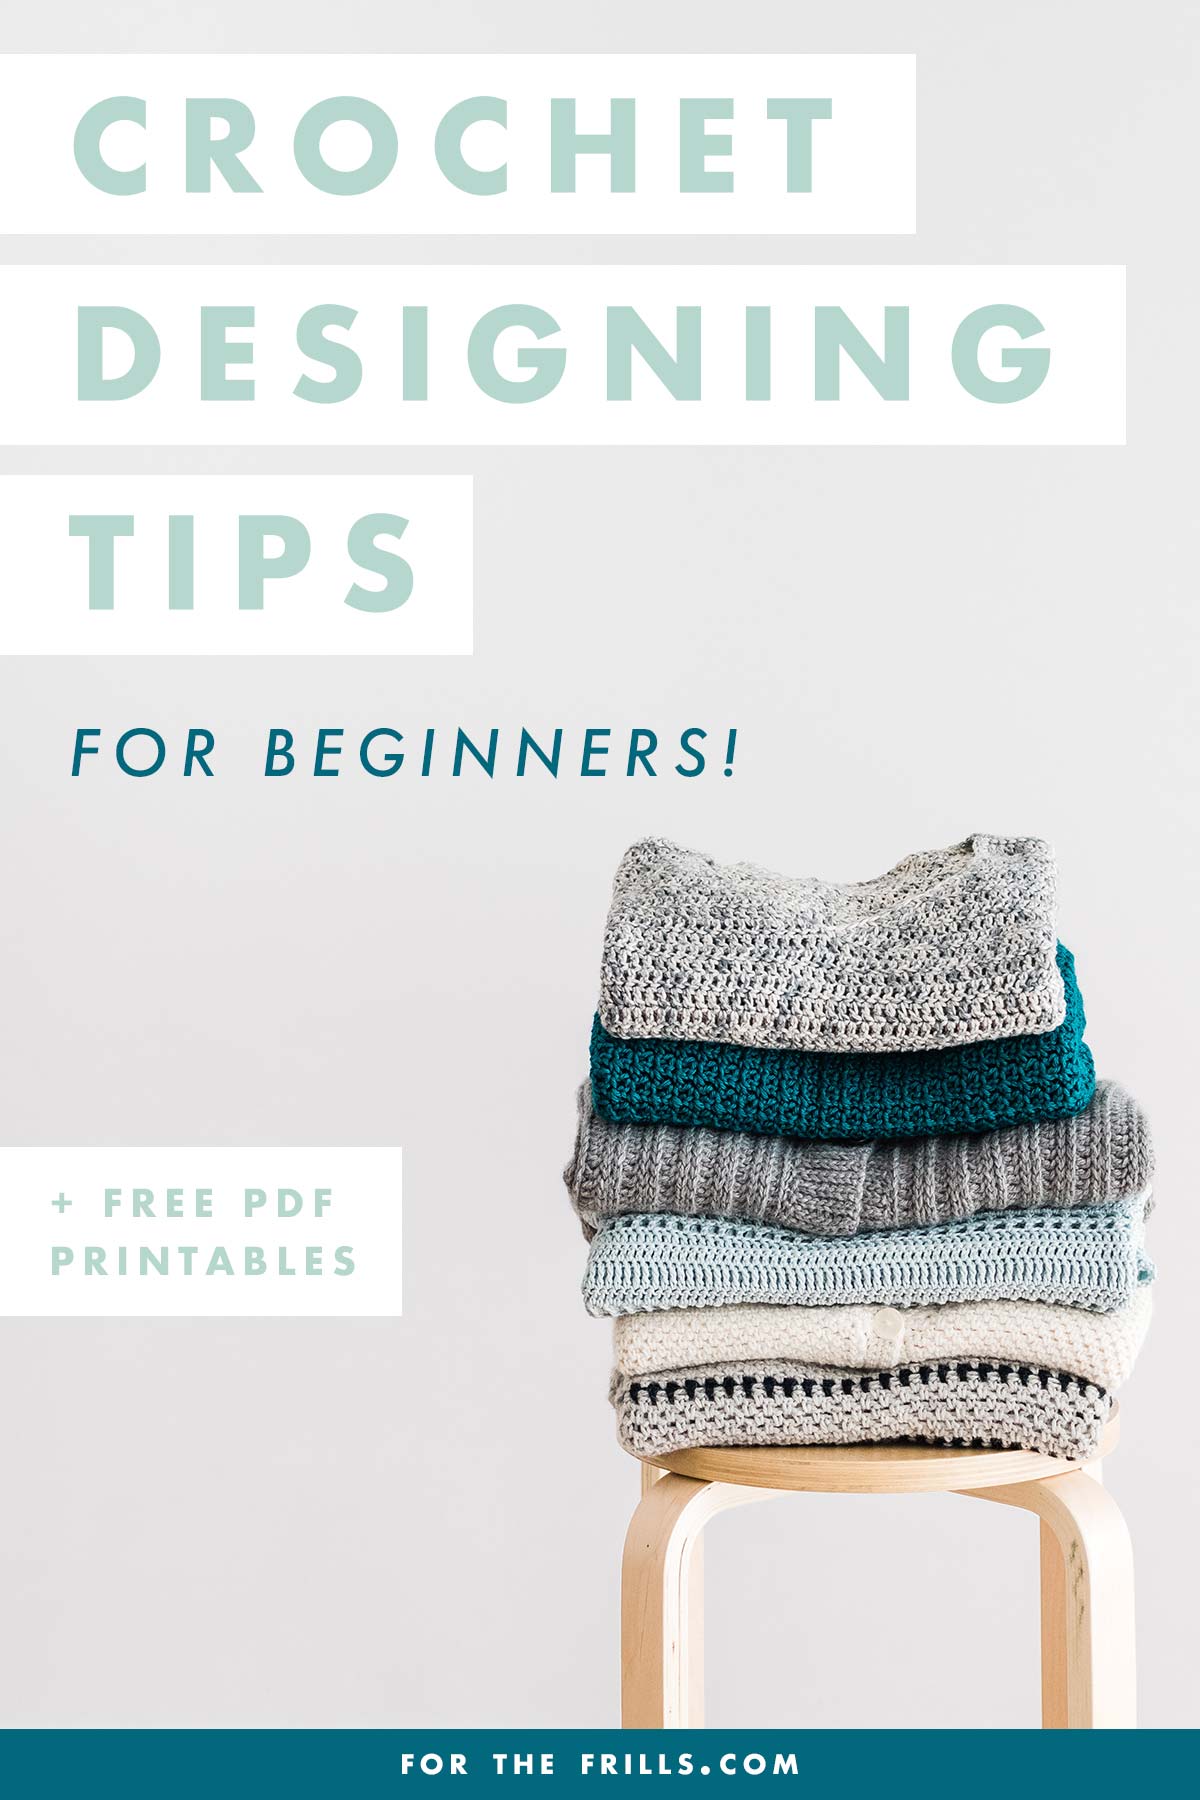 v-neck crochet pullover on top of single crochet column sweater in a stack on chair with crochet designing tips for beginners and free pdf printables text